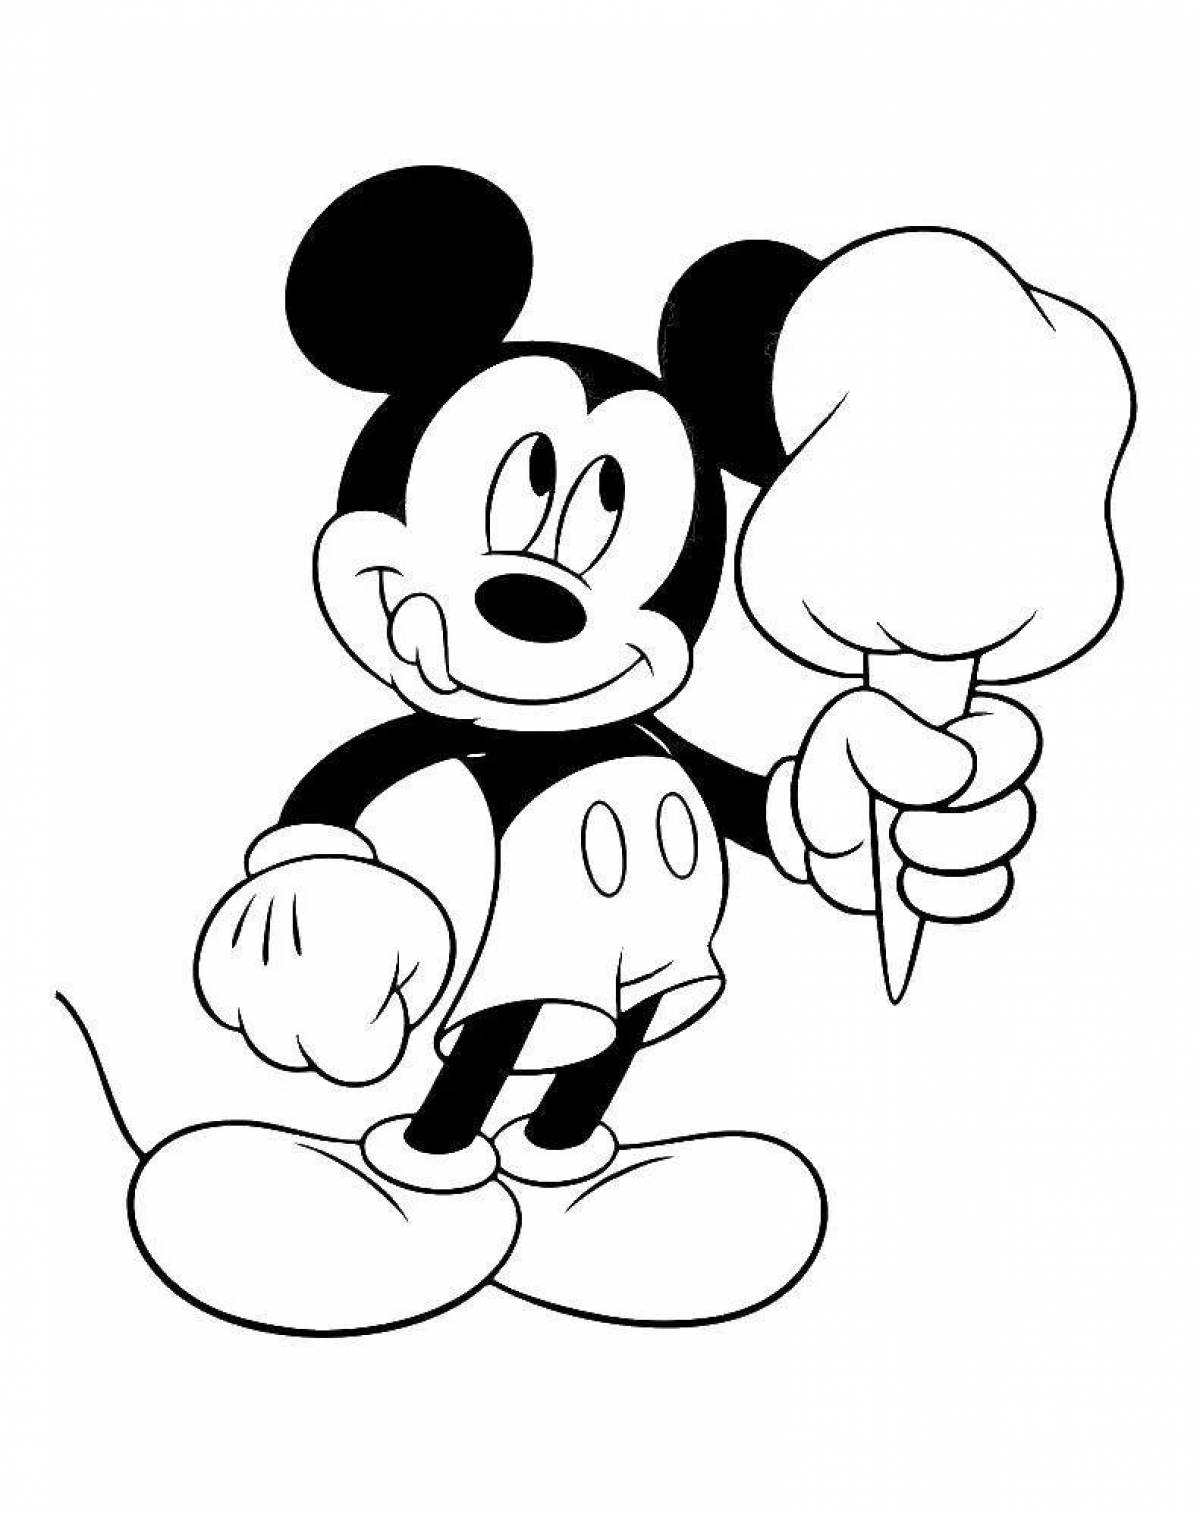 With mickey mouse #12